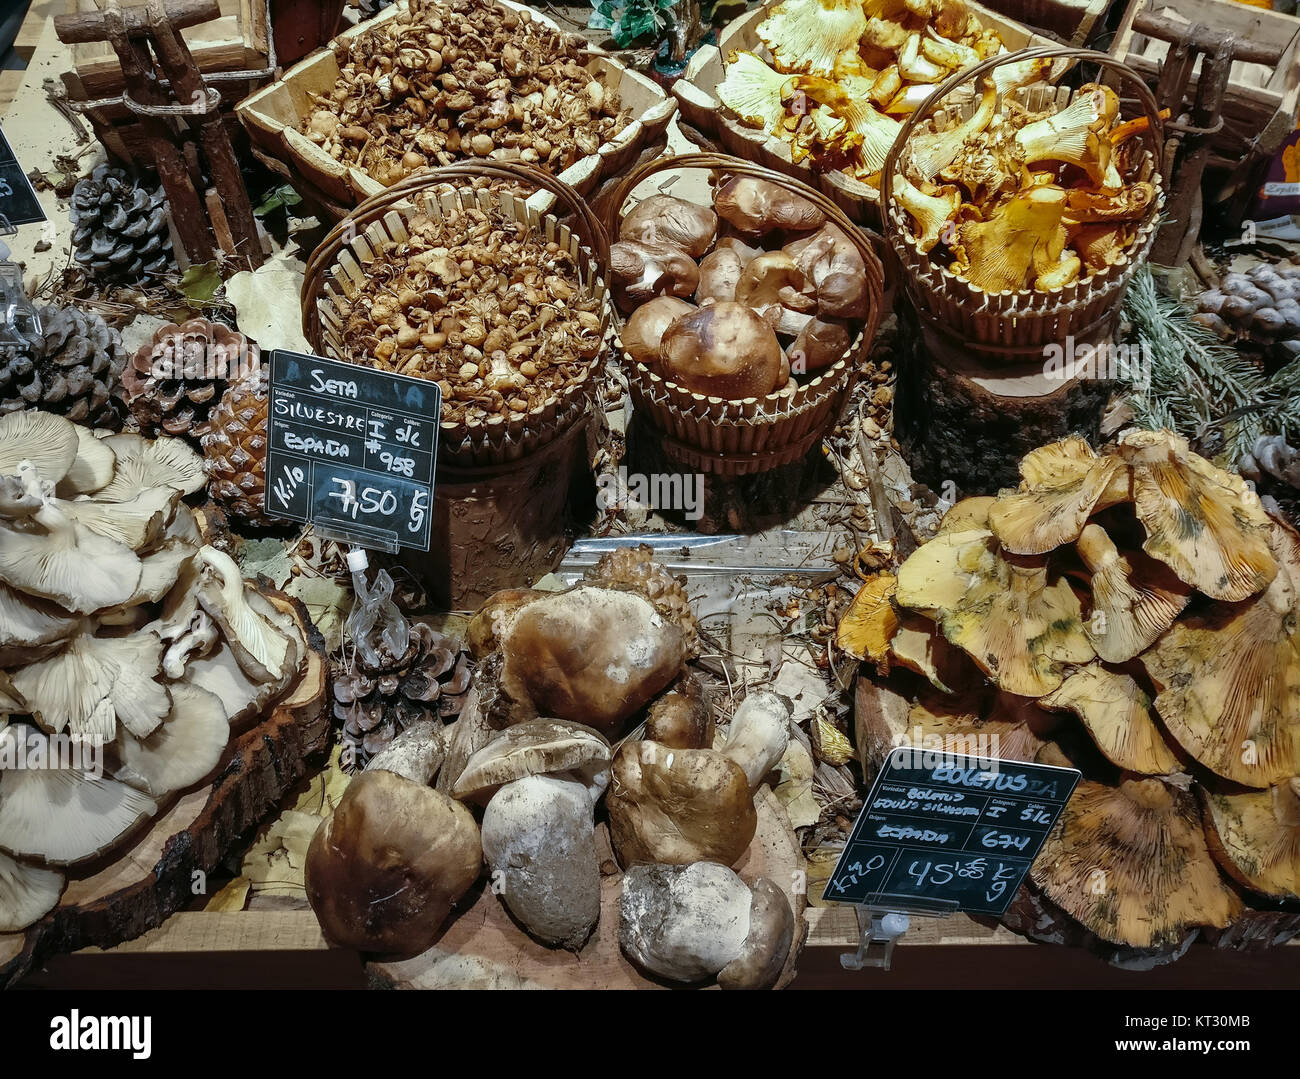 Many different edible mushrooms in baskets on food market. Gourmet food. Autumn Mushrooms. Stock Photo